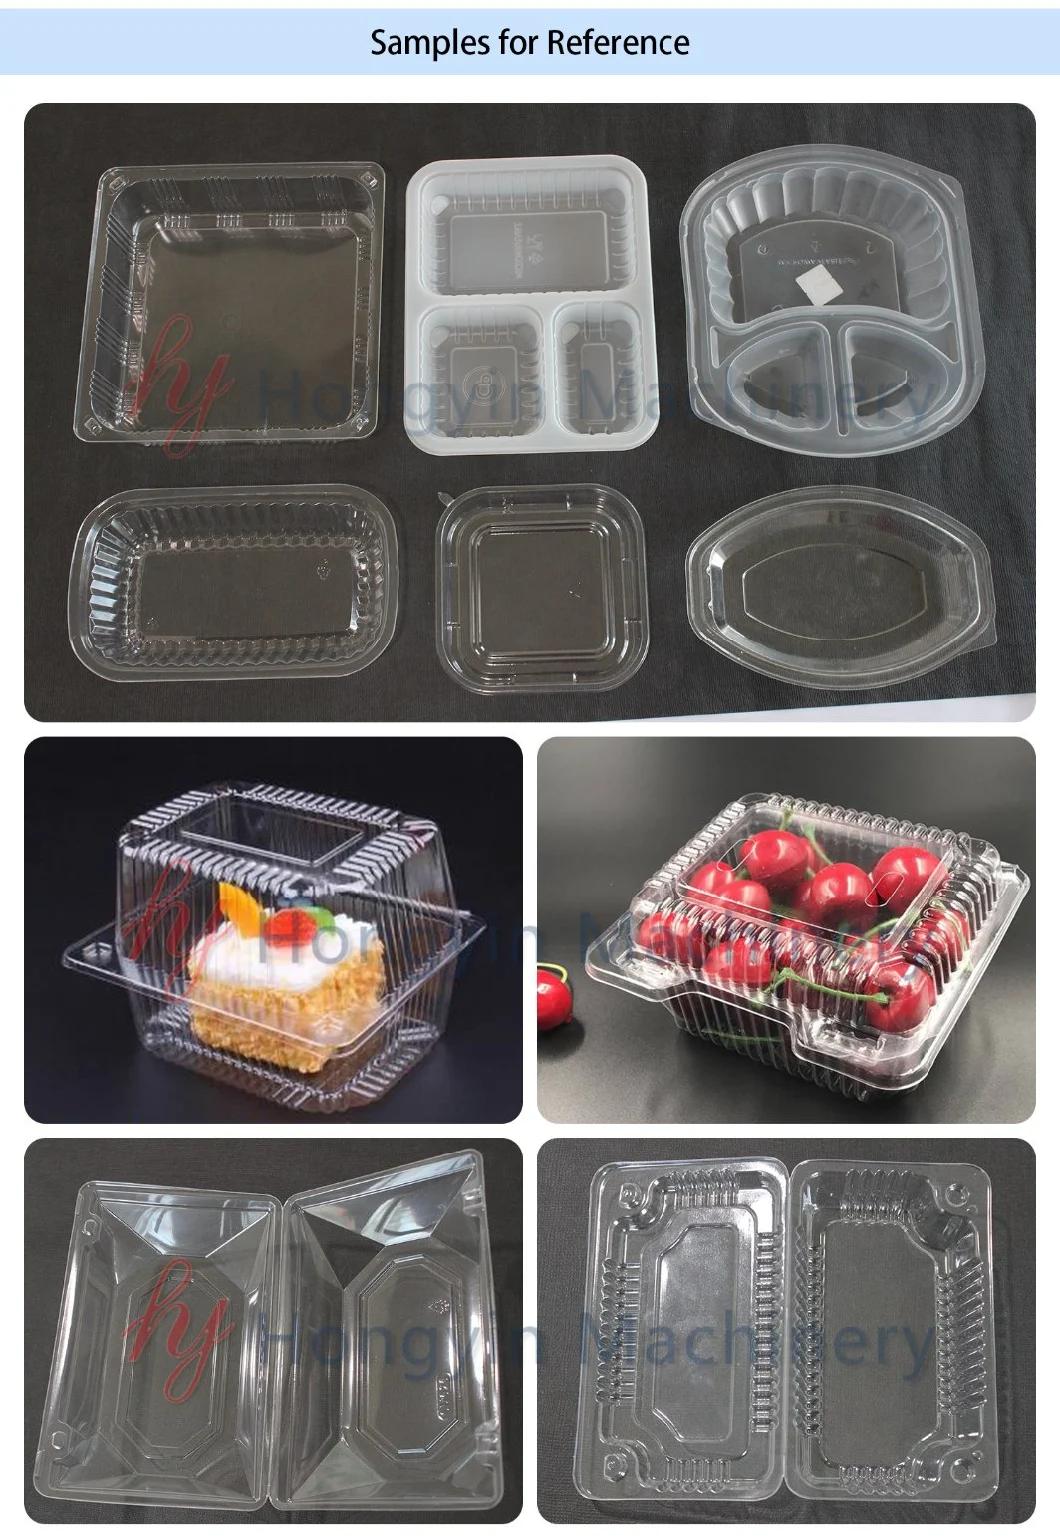 High-Speed Thicker Sheet Automatic Plastic Thermoforming Machine for Cup Lids